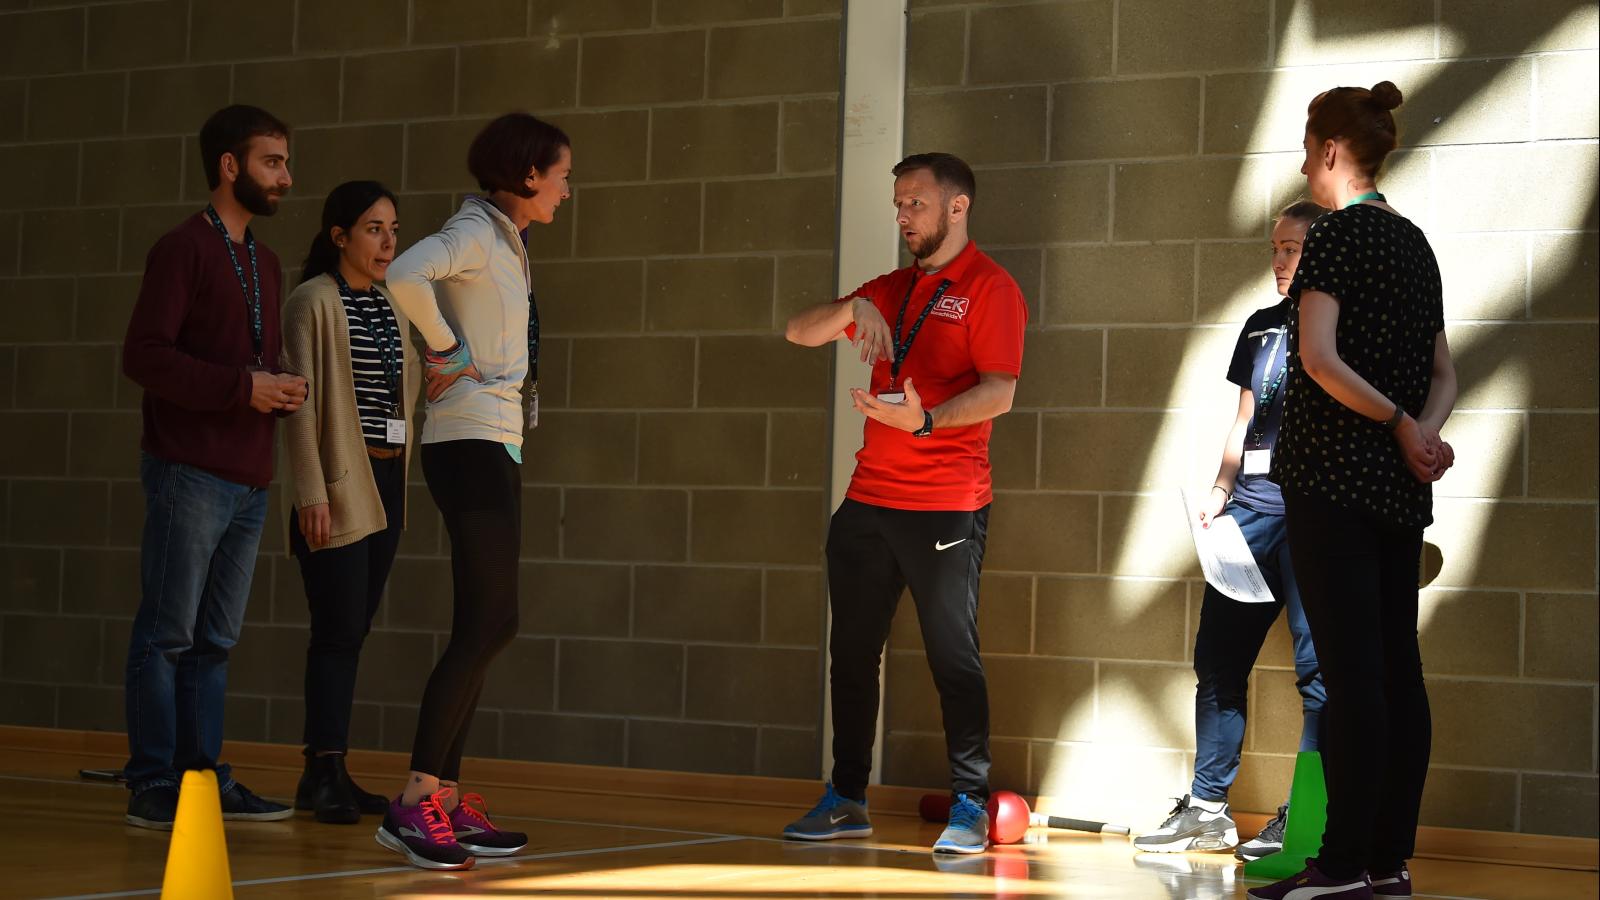 A coach addresses a group of students in a sports hall